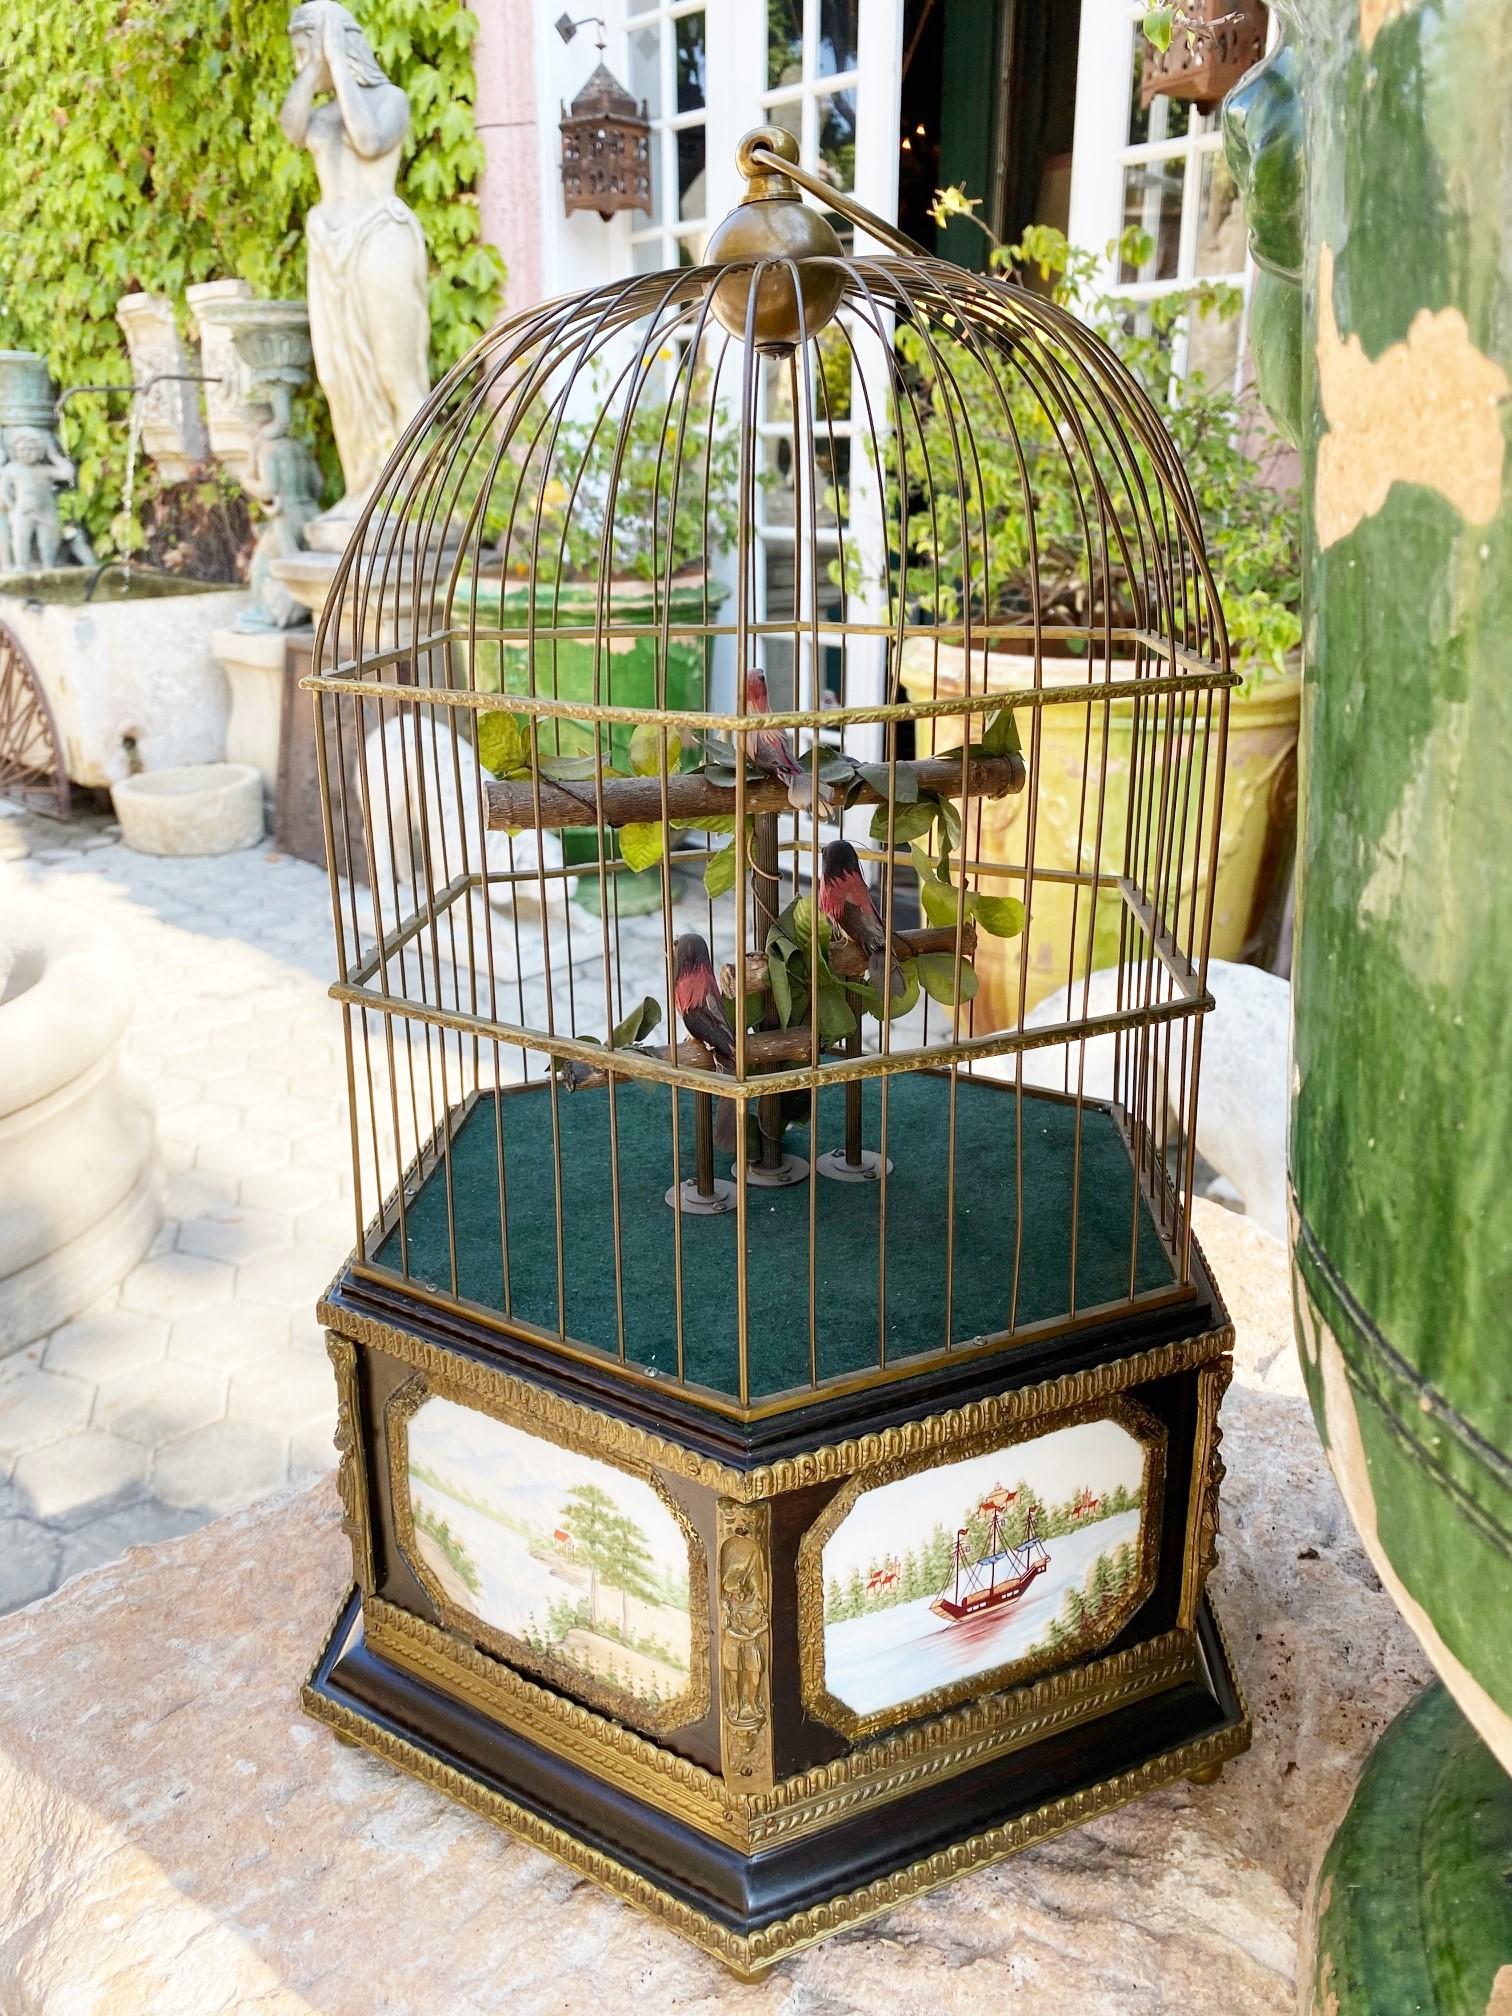 This stunning 3 singing birds in a cage automation in good working condition. Each of the three colored birds with feather plumage beak and tail movement they alternate singing. Sitting on tree branches leafy perch in a gilt brass cage with control